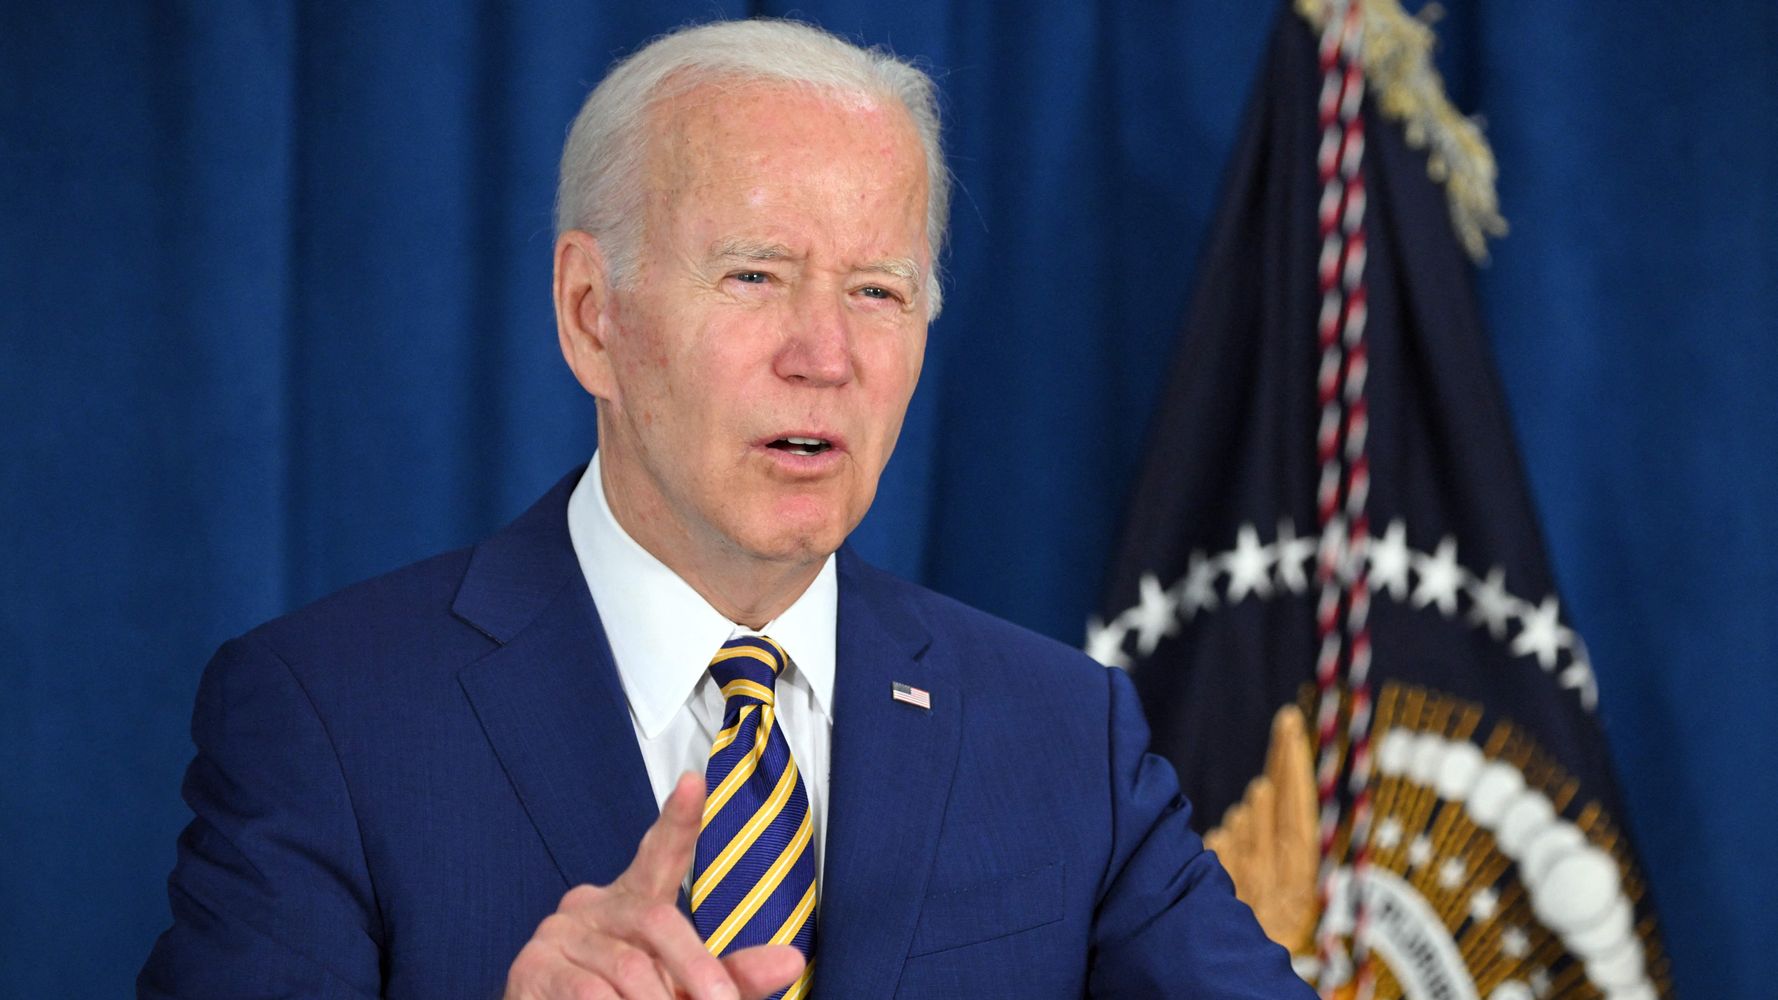 Biden Gives Perfect Response To Richest Man In The World Whining About The Economy